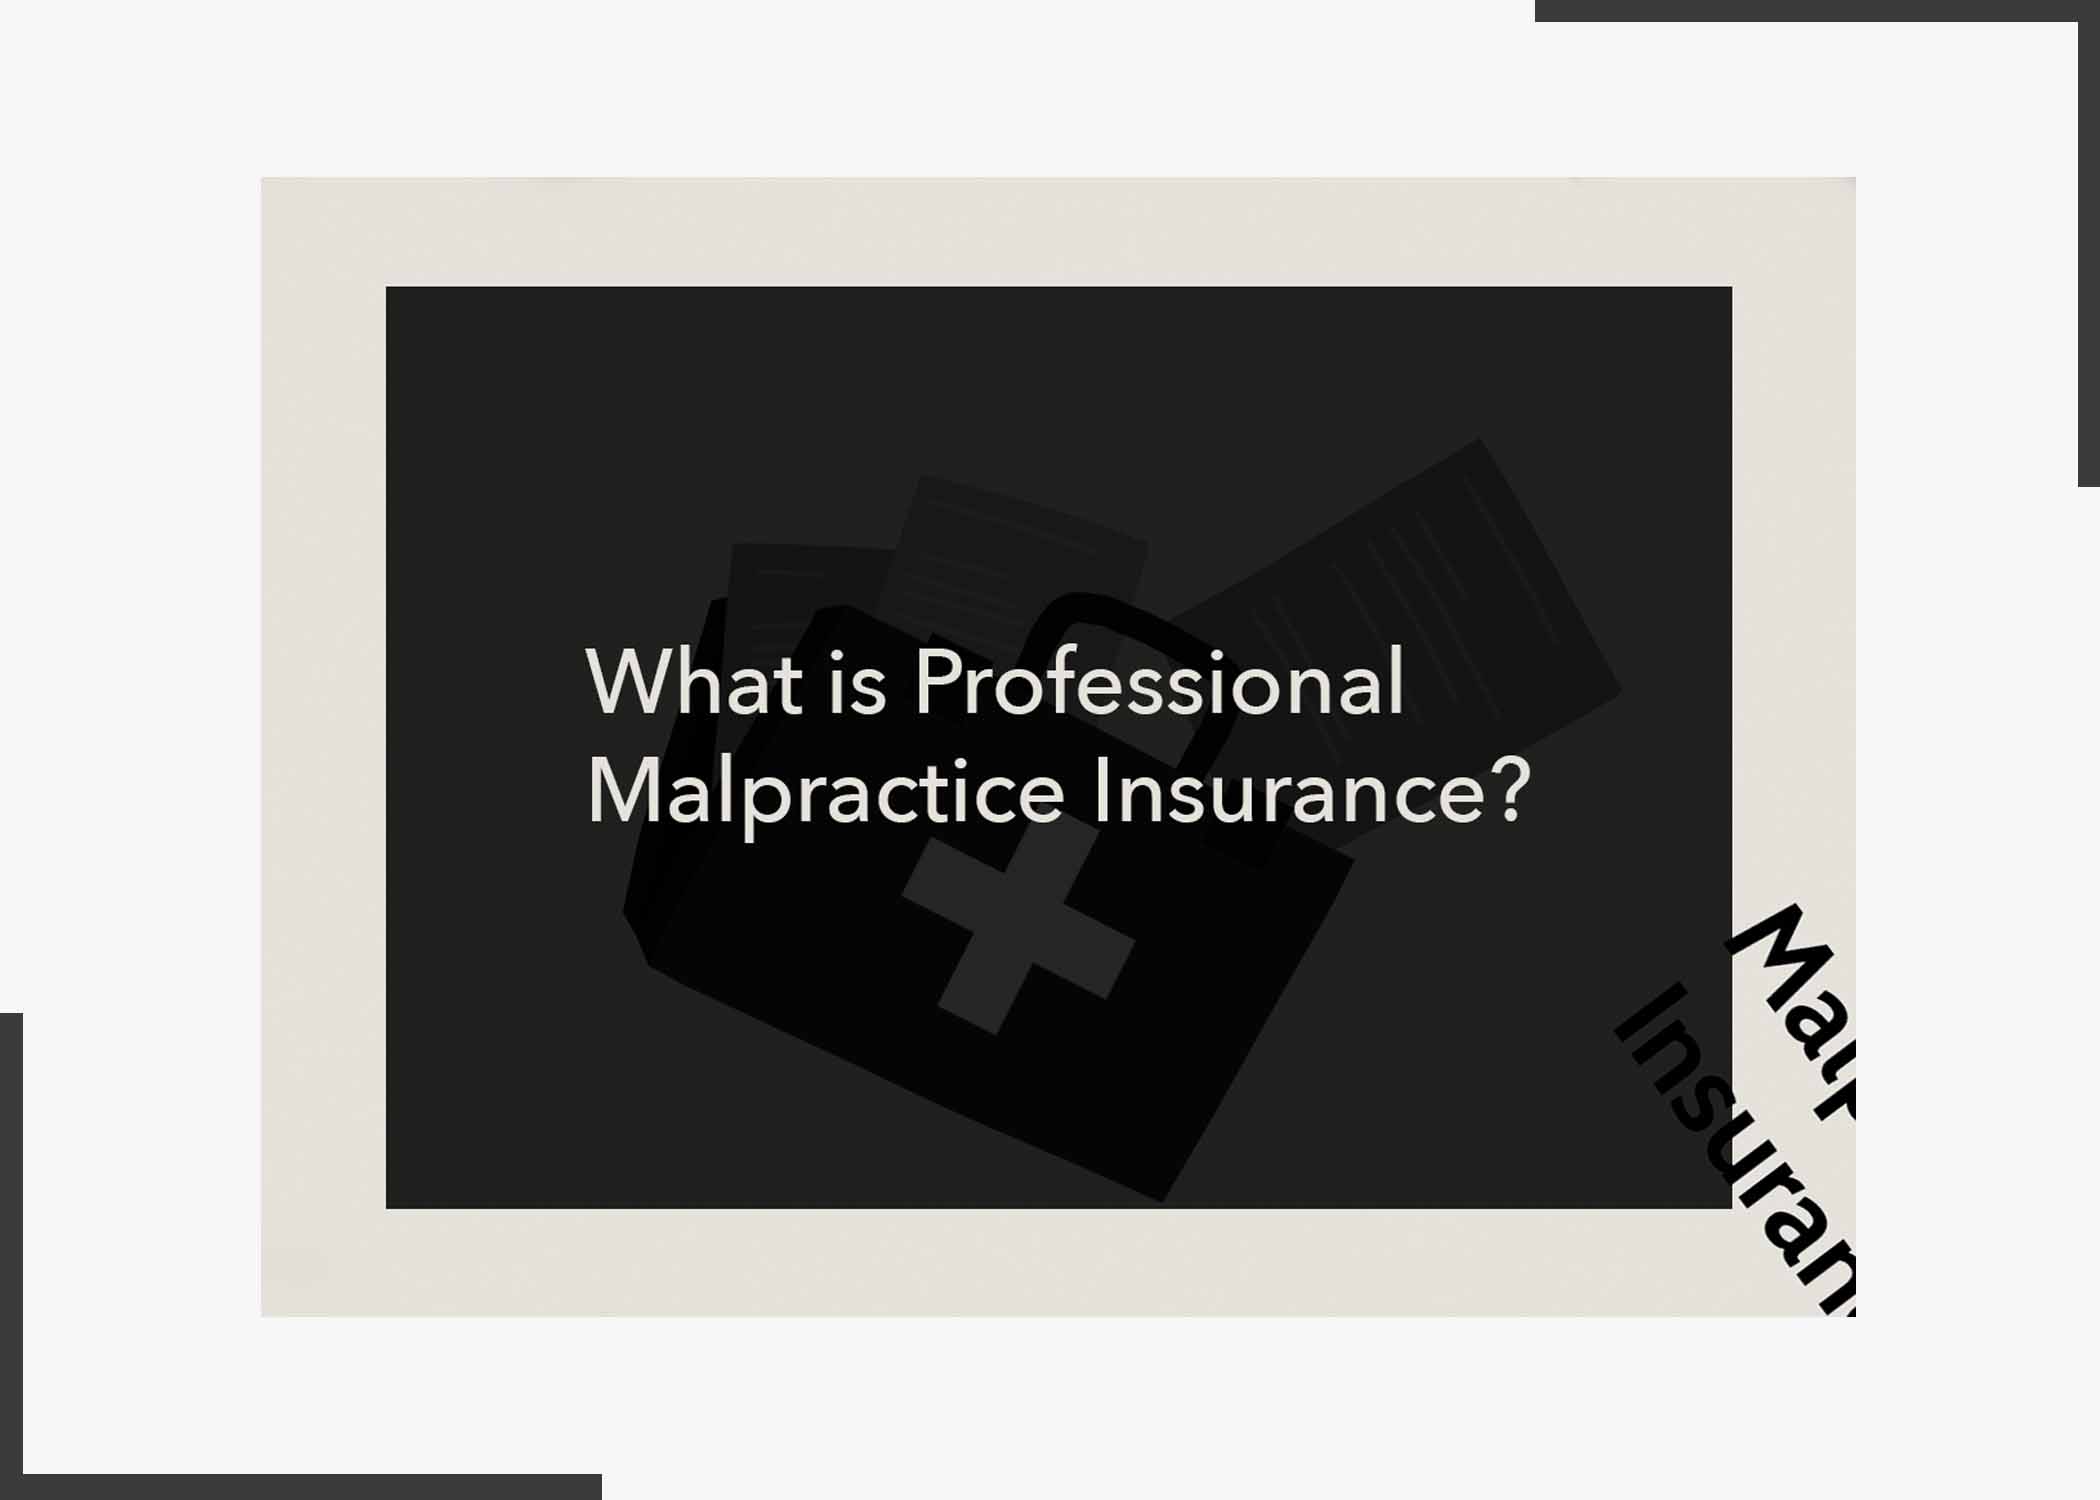 What is Professional Malpractice Insurance?